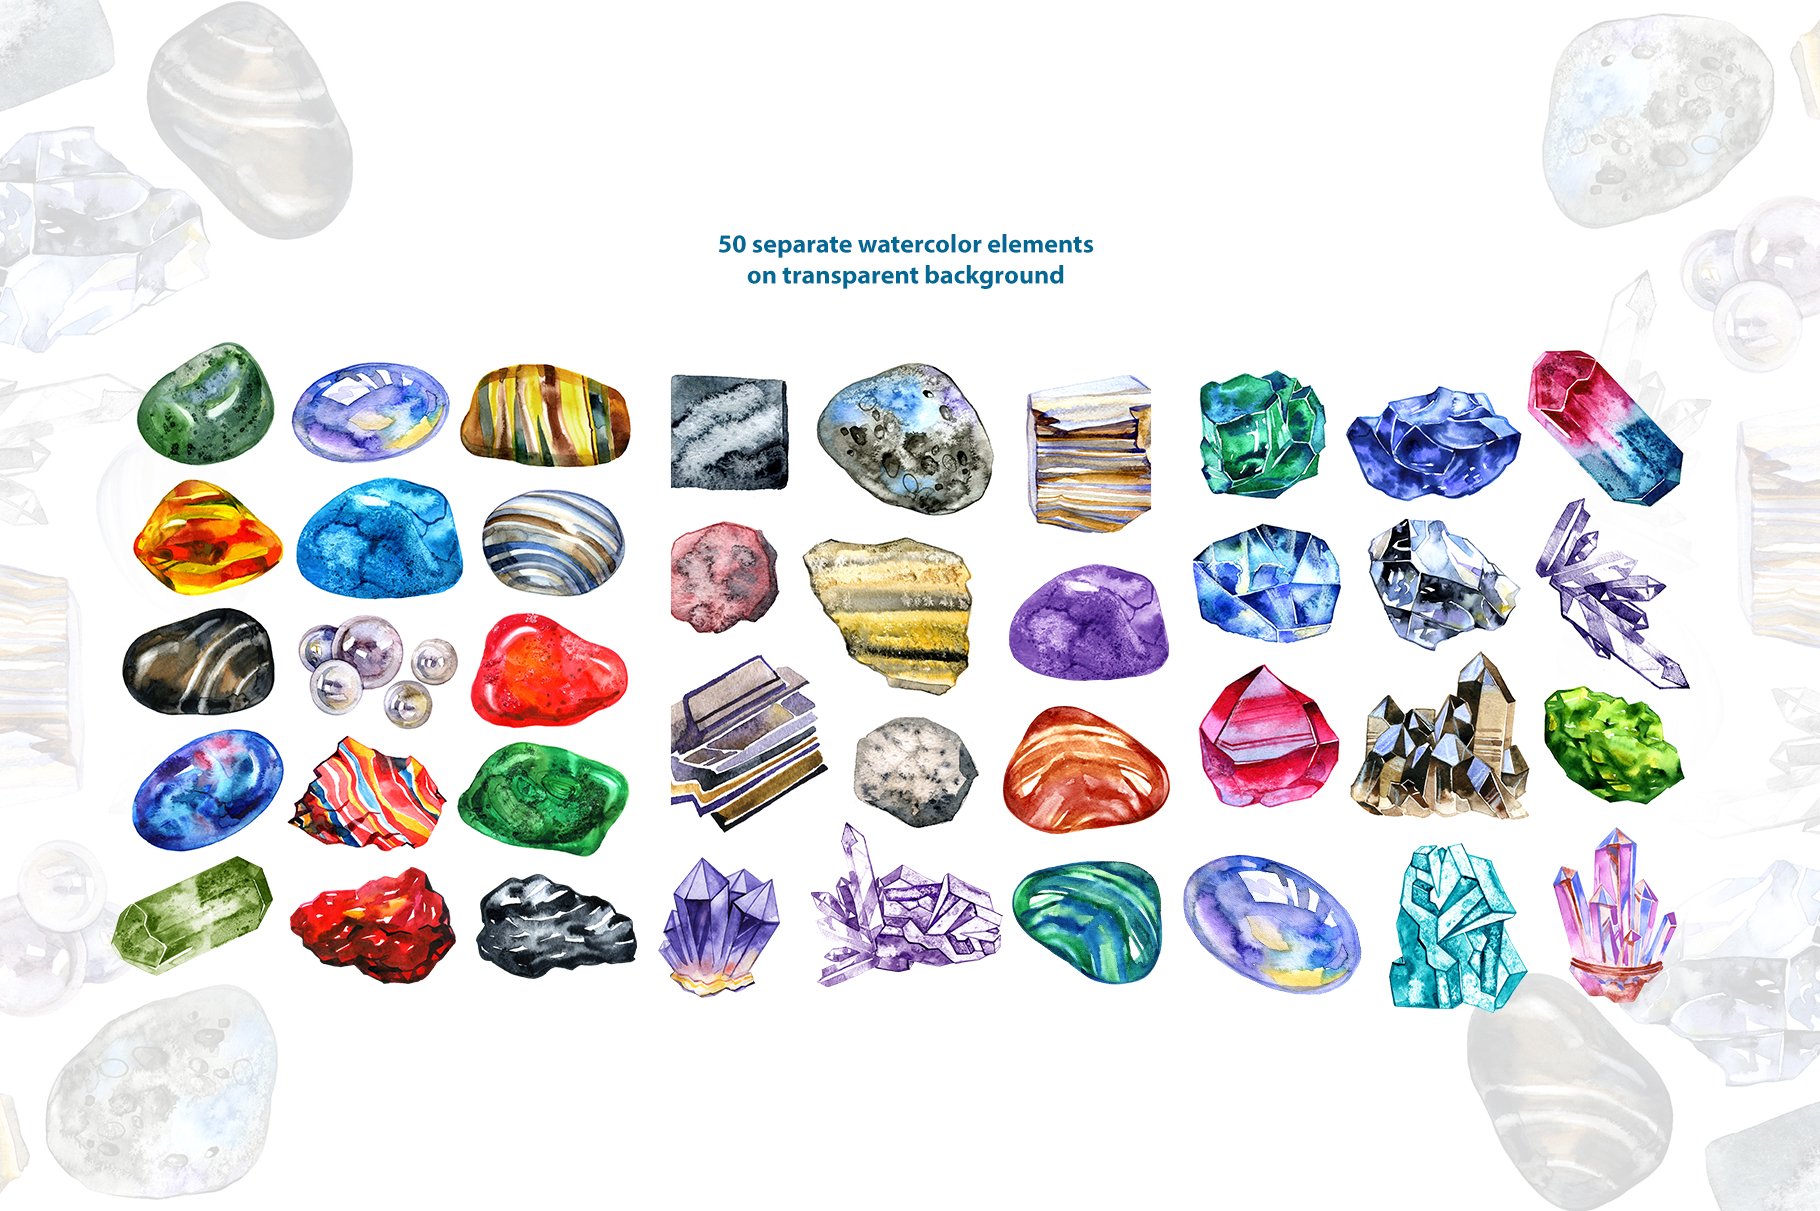 Watercolor minerals and gems preview image.